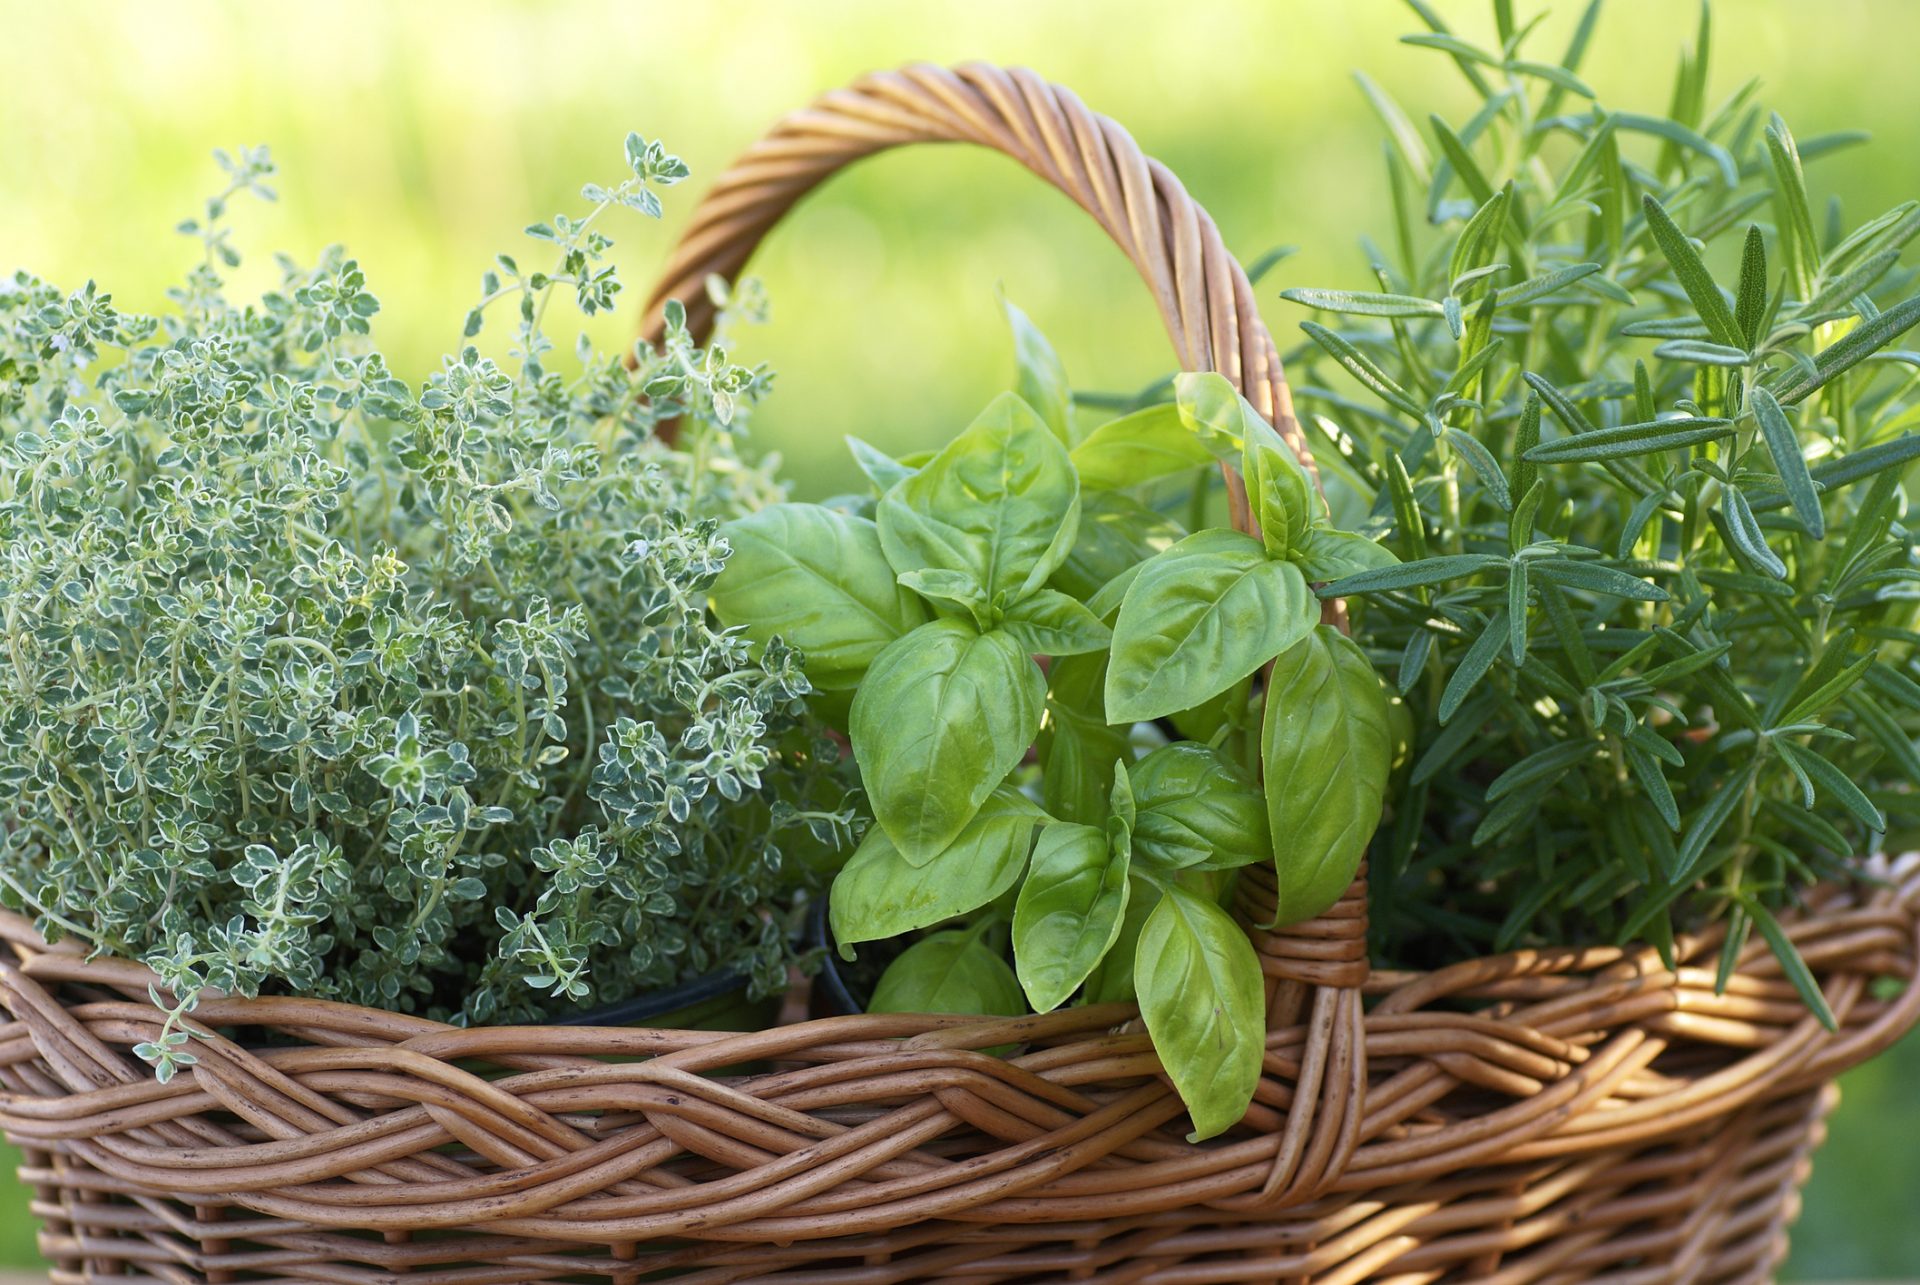 Basket with thyme, basil and rosemary in the garden. 